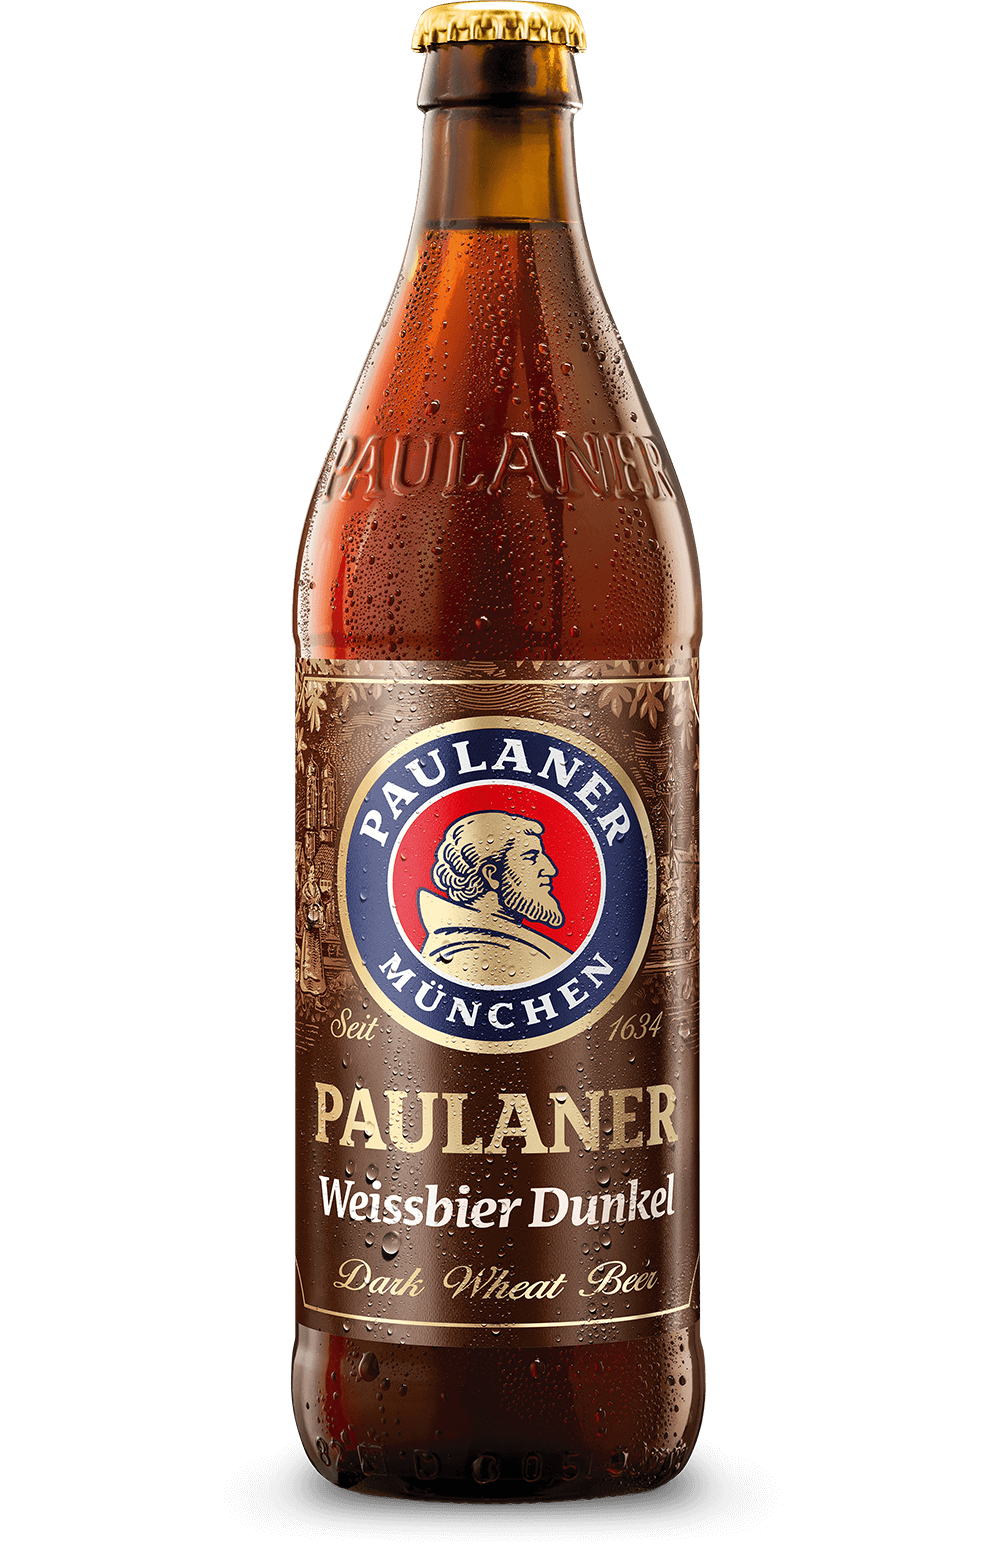 https://www.paulaner.com/content/11-es/1-productos/2-weissbier-dunkel/modules/1-product_intro-rhvdfp/bottle-int-1000x1550-hwbd.png